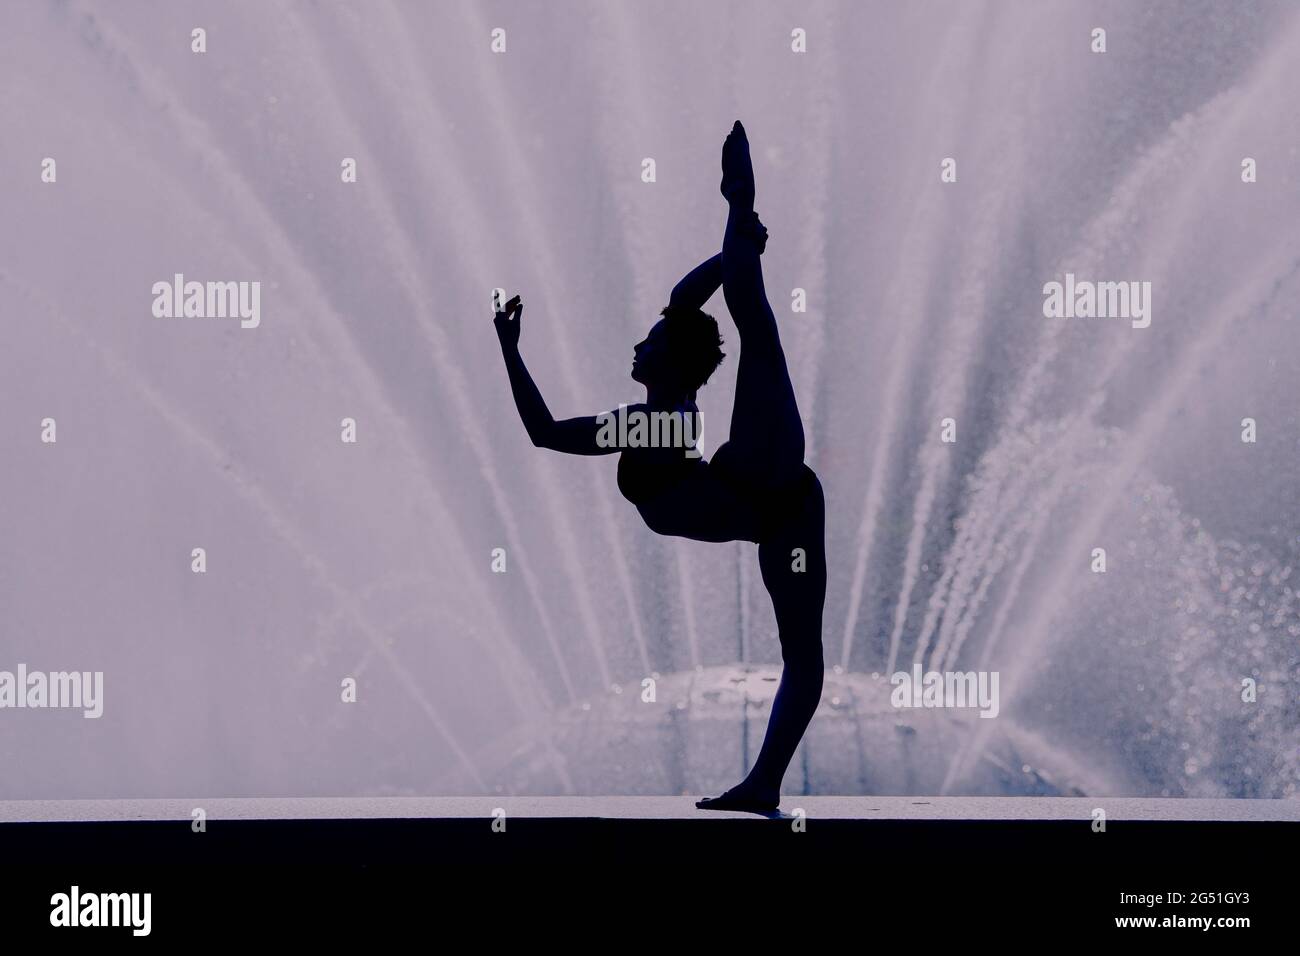 Silhouette of woman doing acrobatic pose against fountain Stock Photo